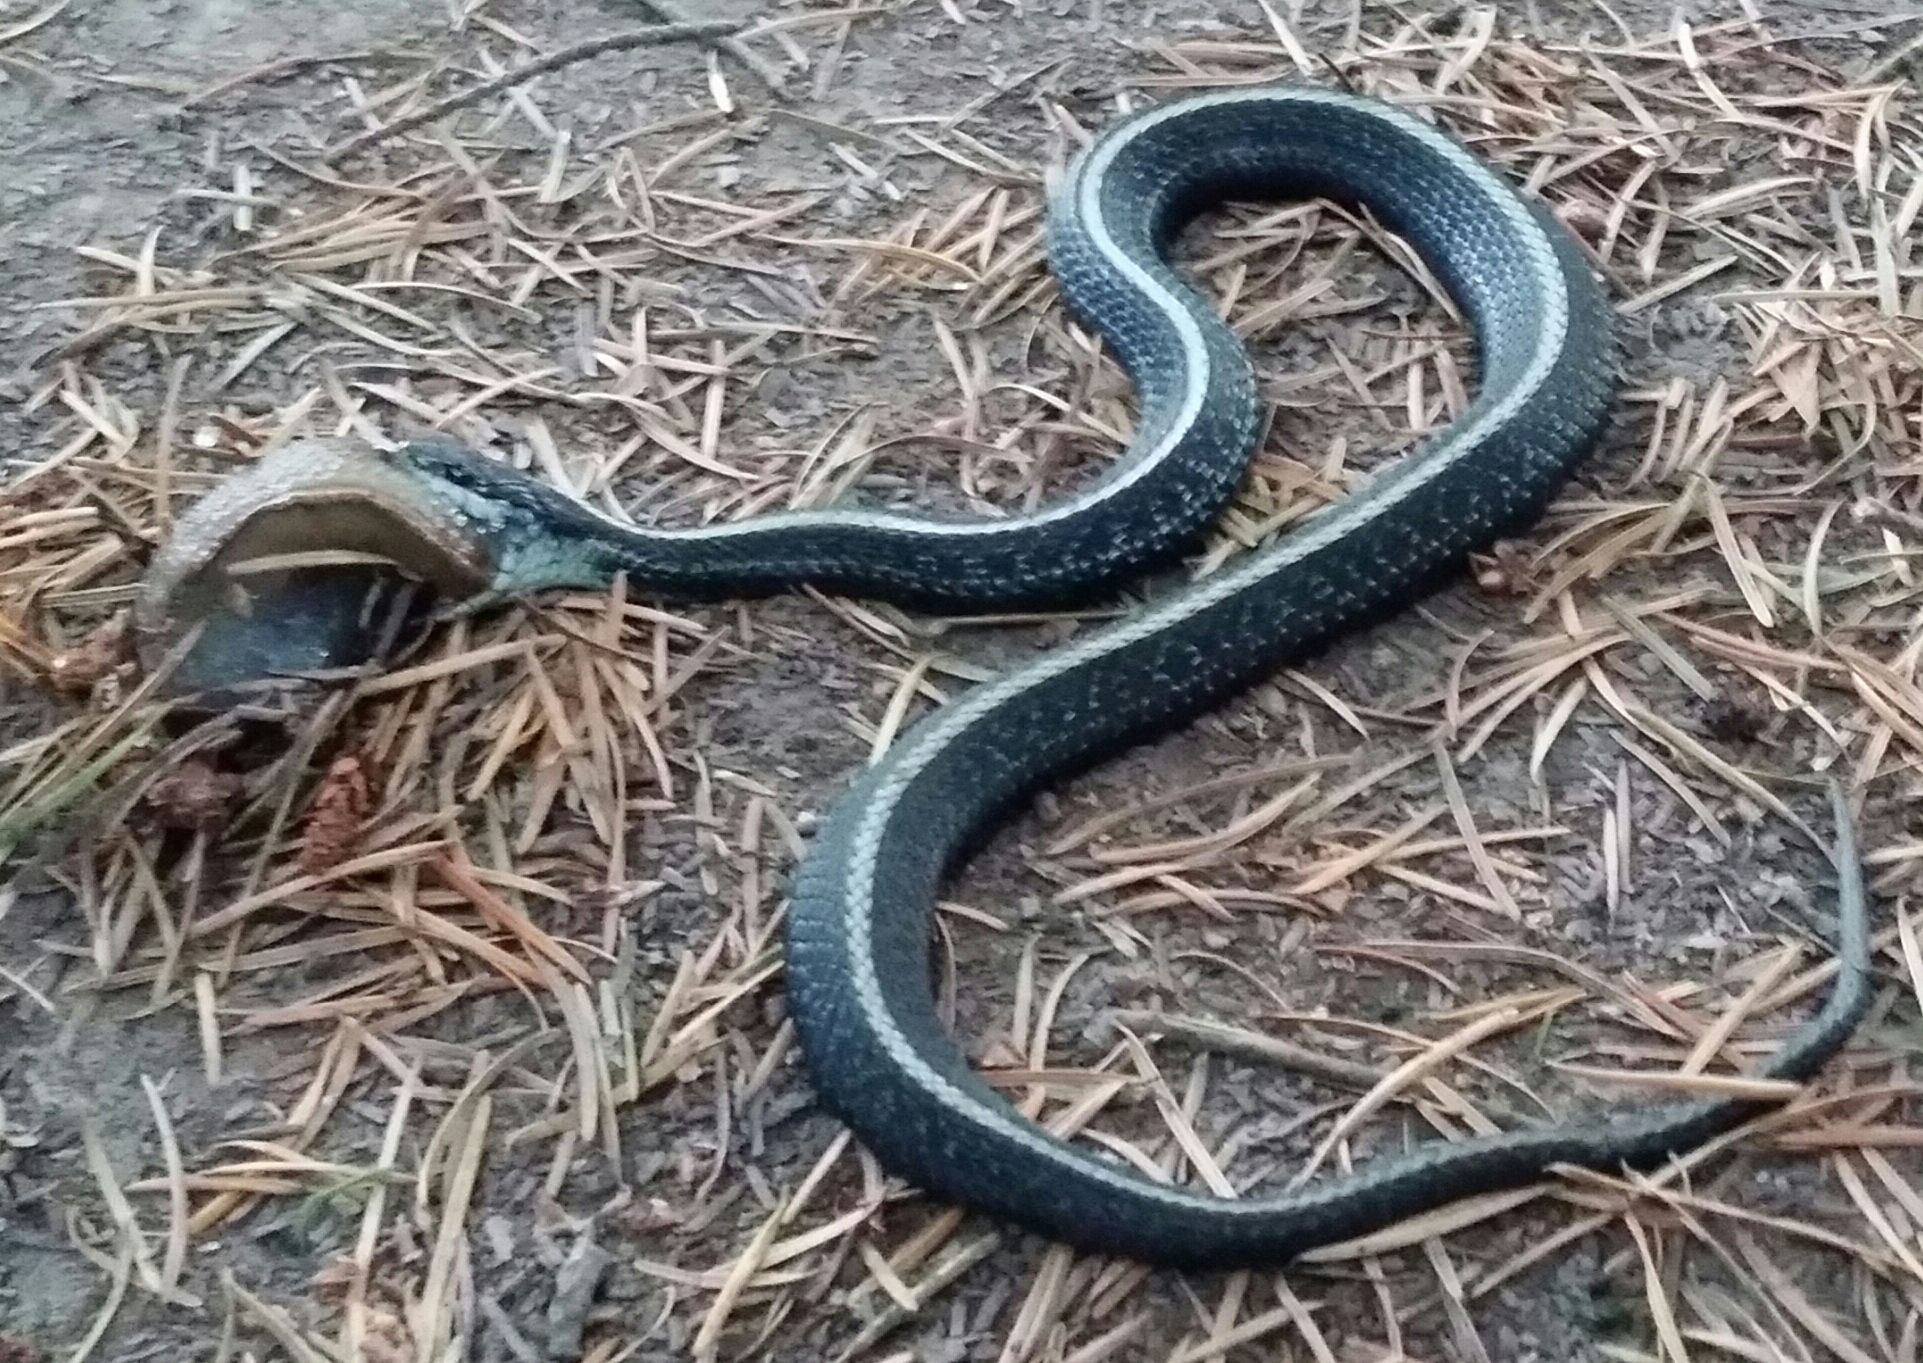 Came home from work to this snake attempting to swallow a slug whole